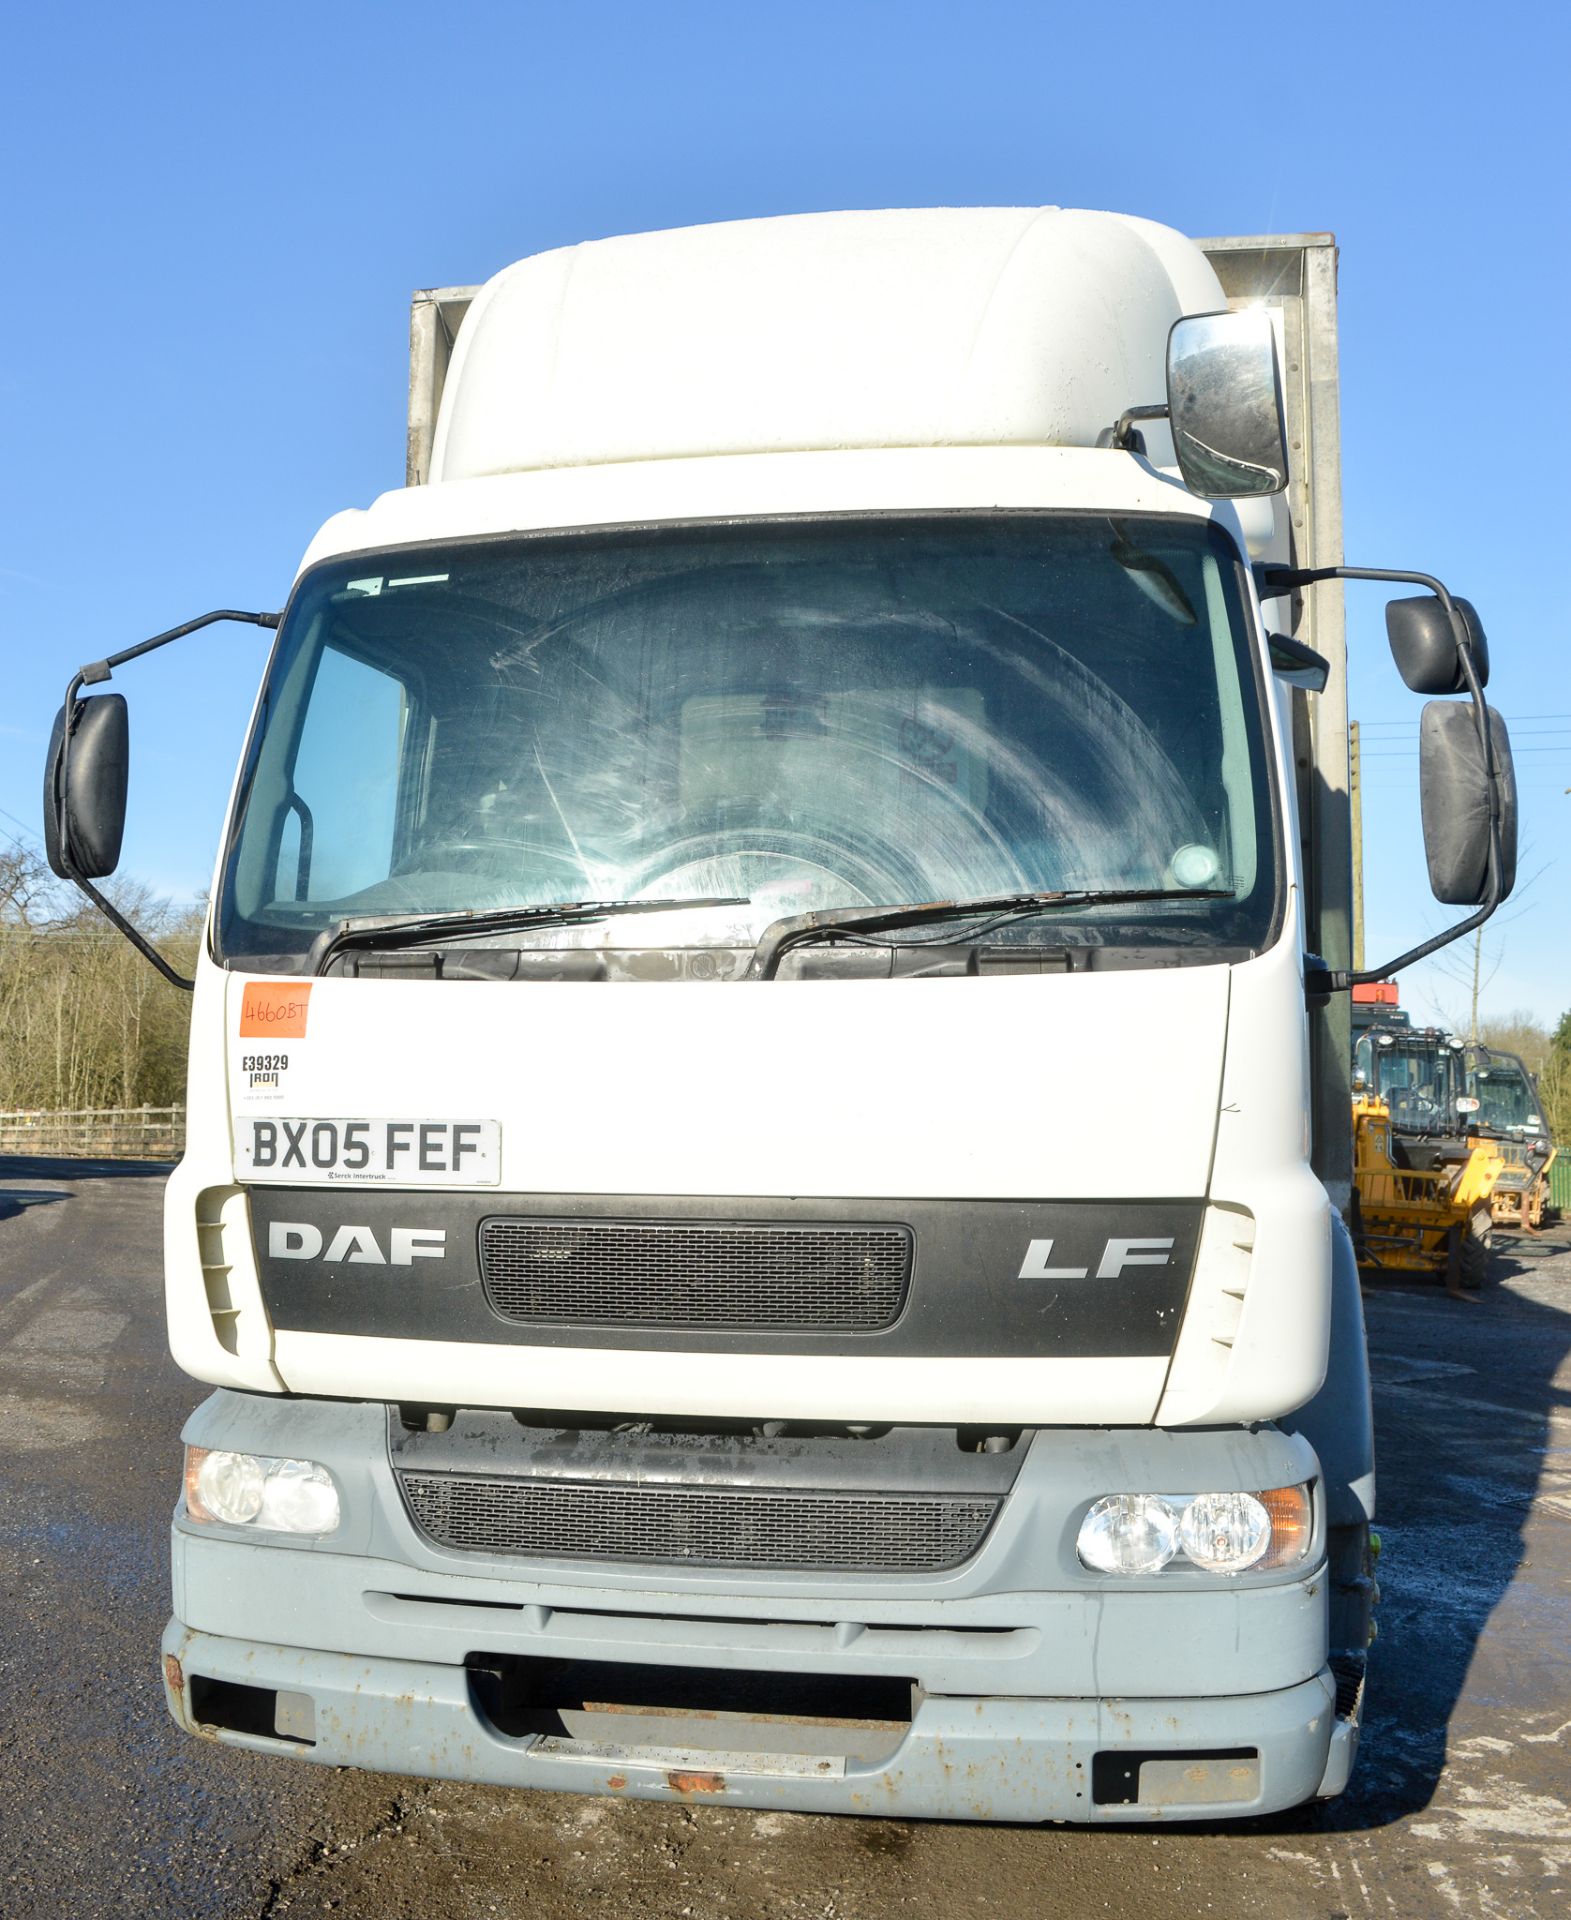 DAF 55-220 18 tonne curtain side flat bed lorry Registration Number: BX05 FEF Date of - Image 5 of 9